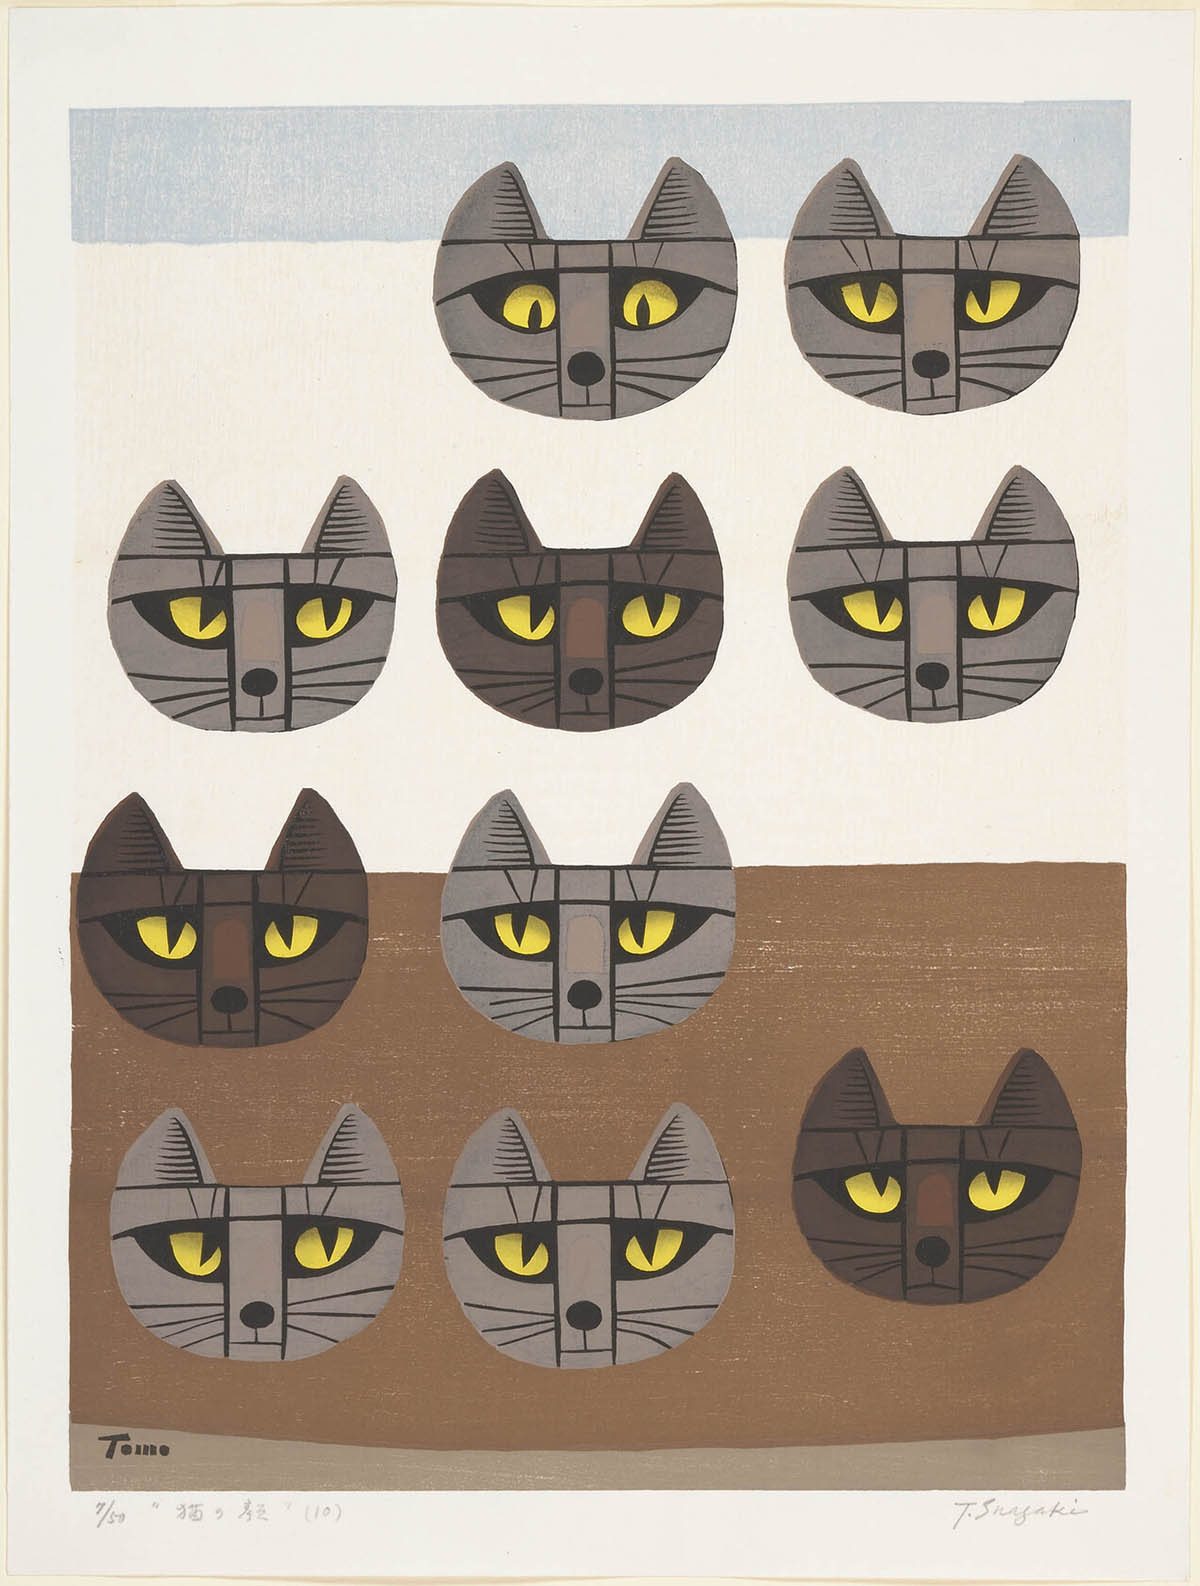 Ten cat heads arranged in four rows appear to float within the image. The background is divided into three sections colored in muted, natural tones. 